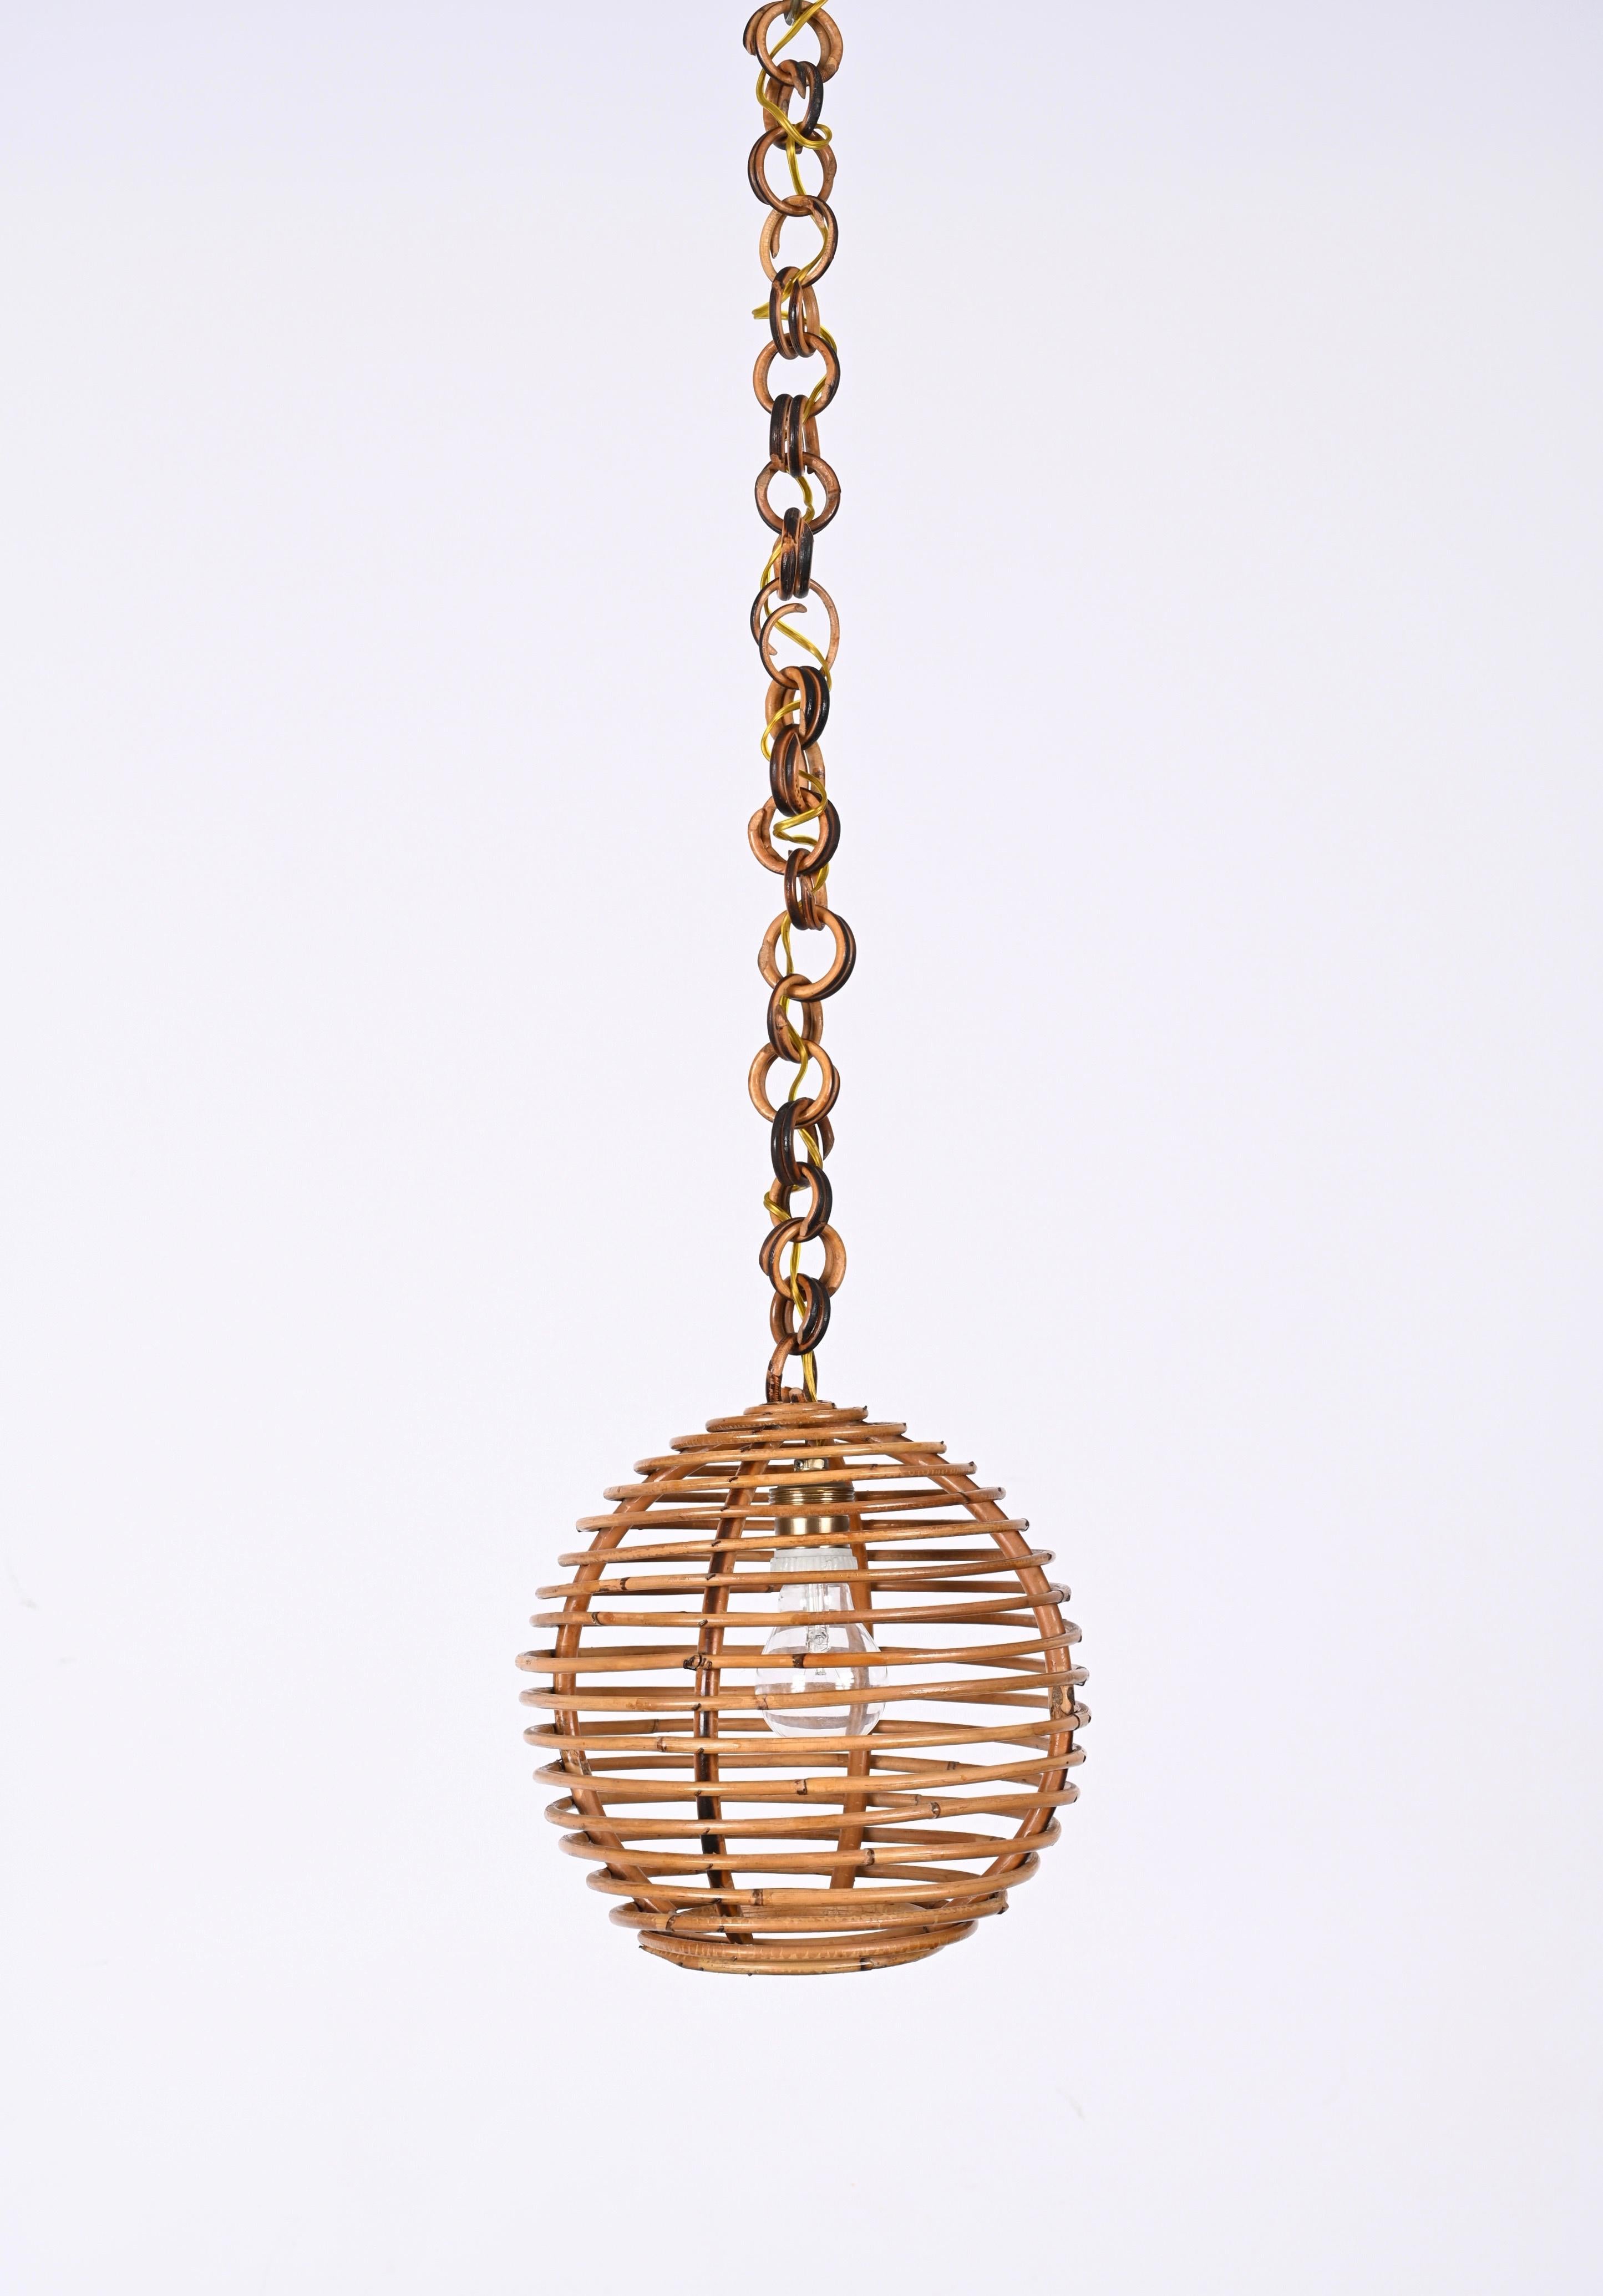 Midcentury French Riviera Bambo and Rattan Spherical Italian Chandelier, 1960s For Sale 8